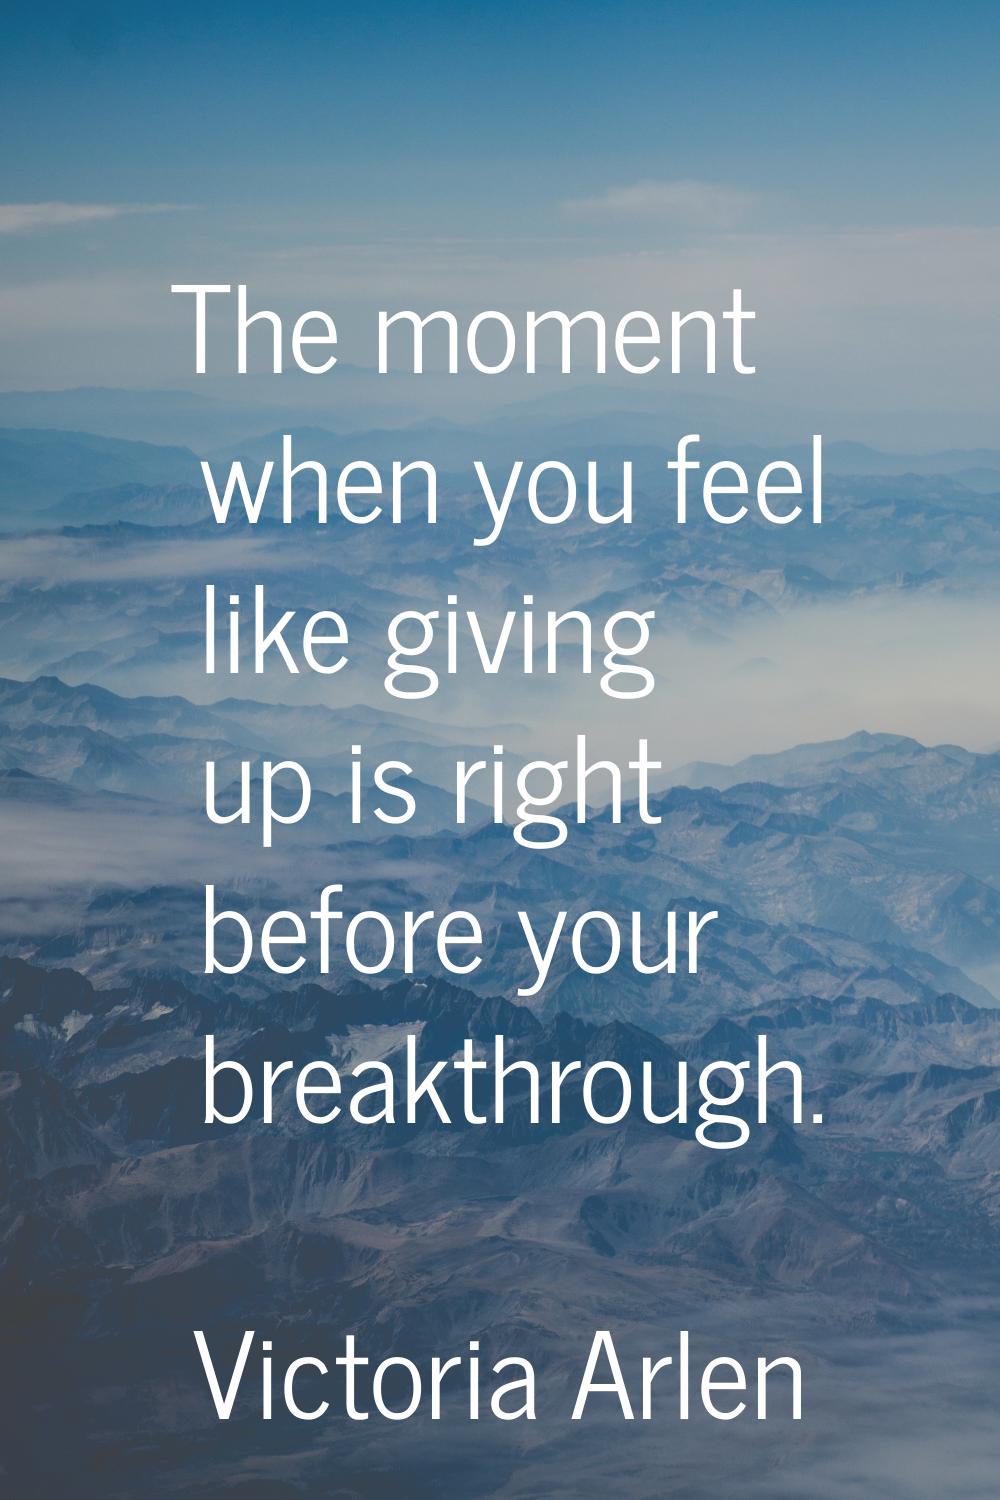 The moment when you feel like giving up is right before your breakthrough.